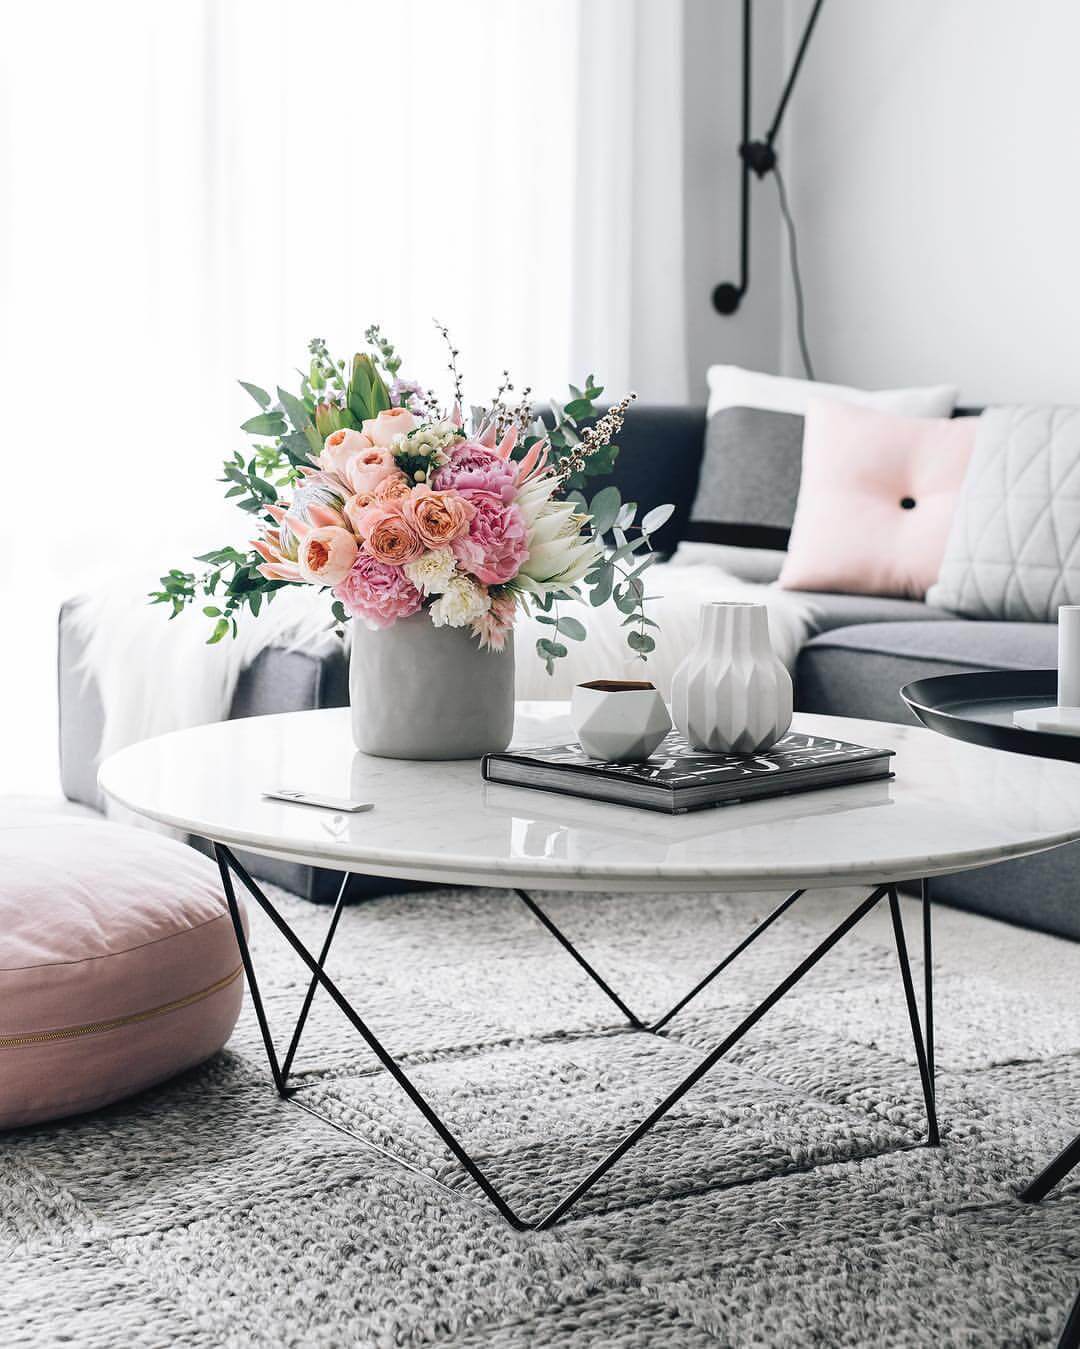 best coffee table decorating ideas and designs for homebnc accents peachy spring flower arrangement with geometric vases vintage brass glass green runner black half moon console